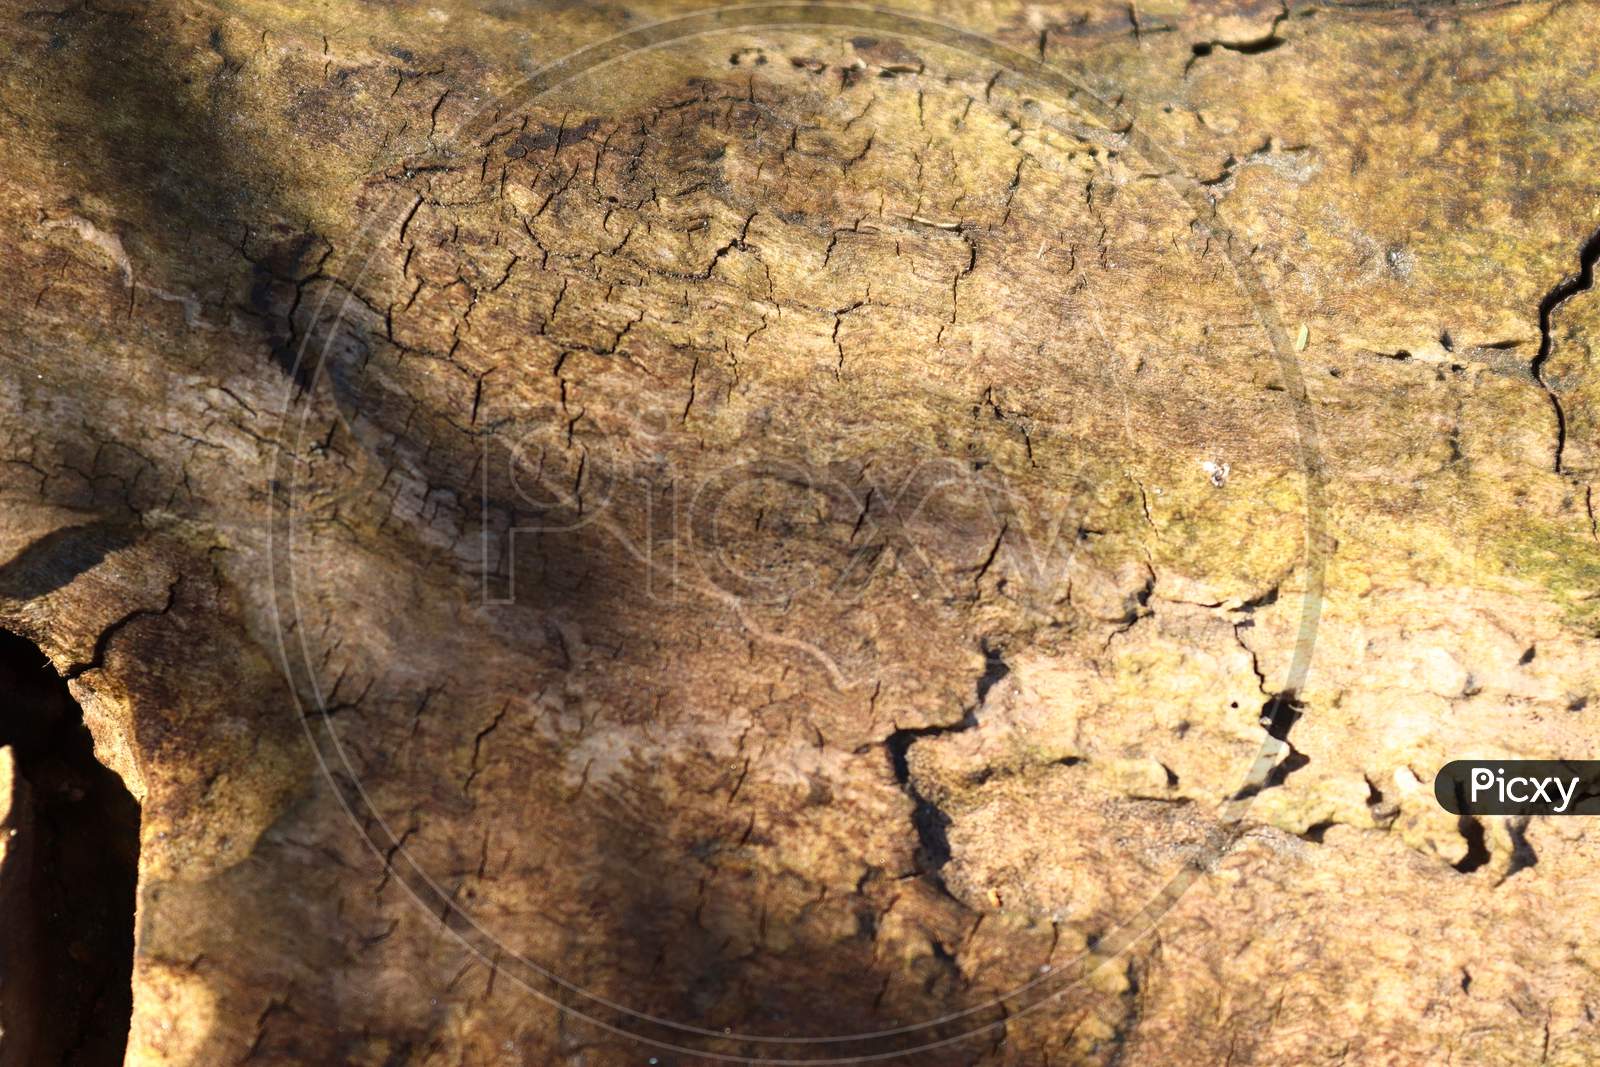 Detailed close up view on natural tree bark in high resolution